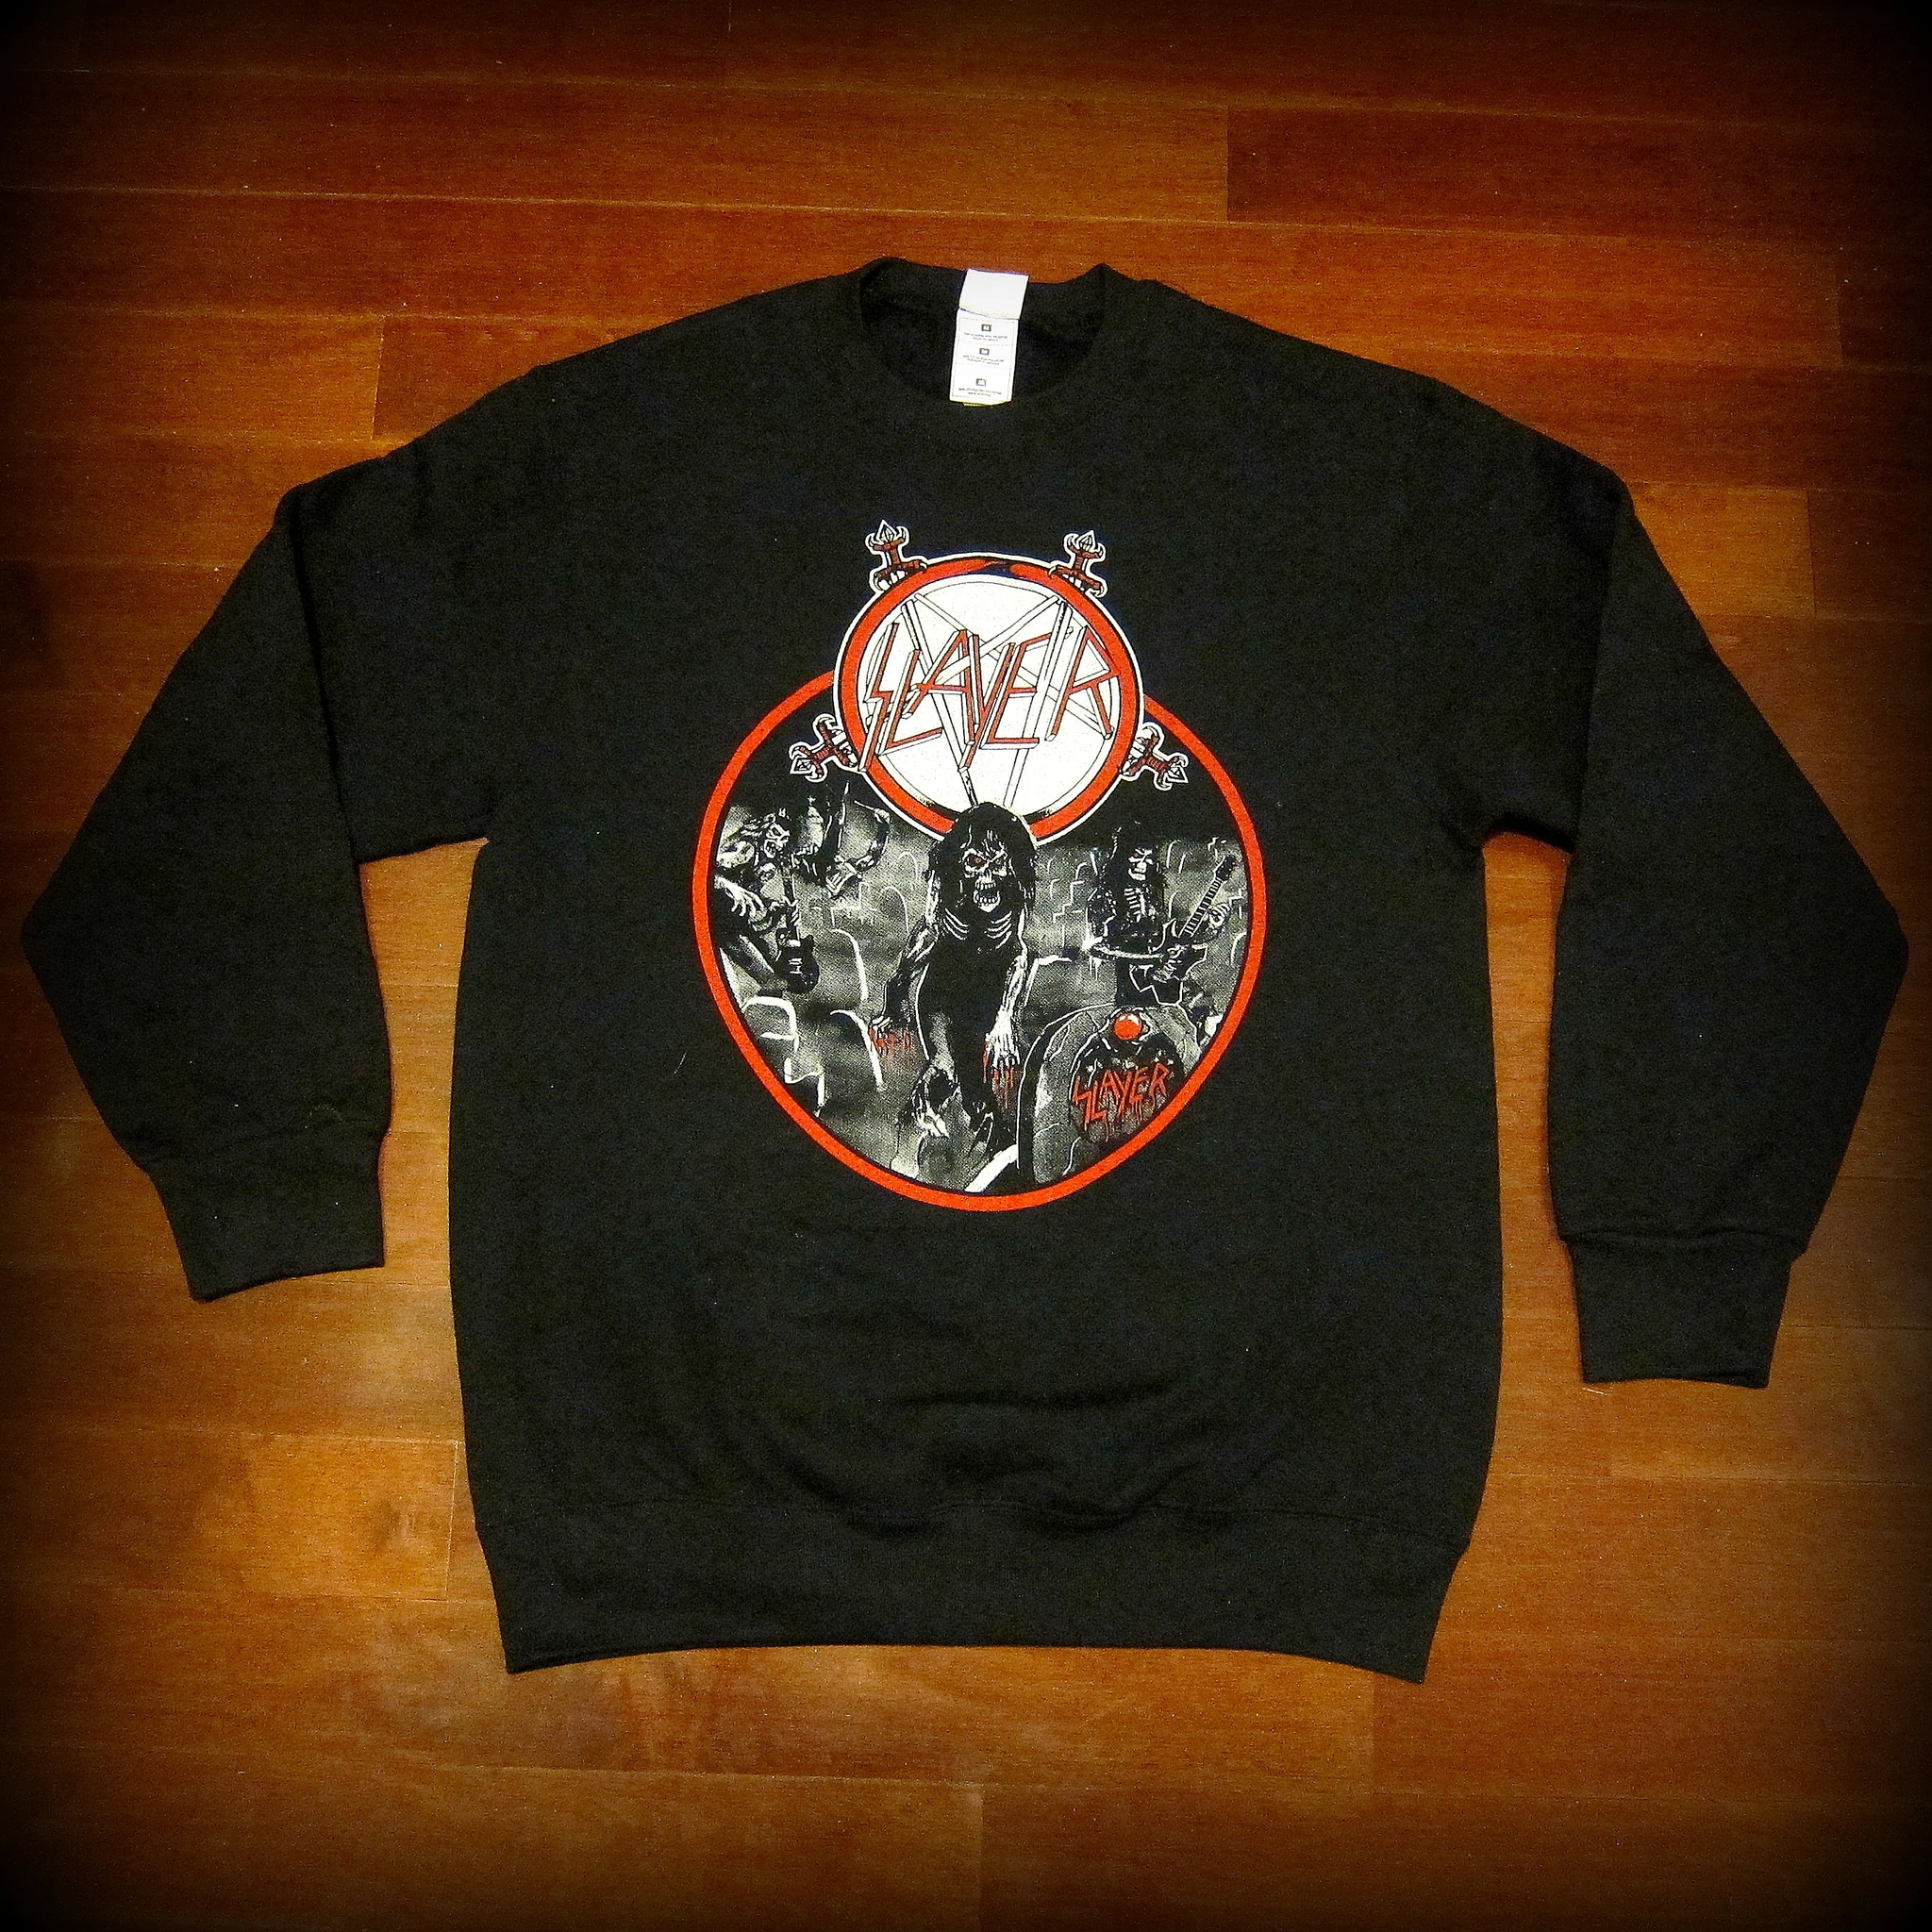 SLAYER - Reign In Blood - Two Sided Printed Sweatshirt